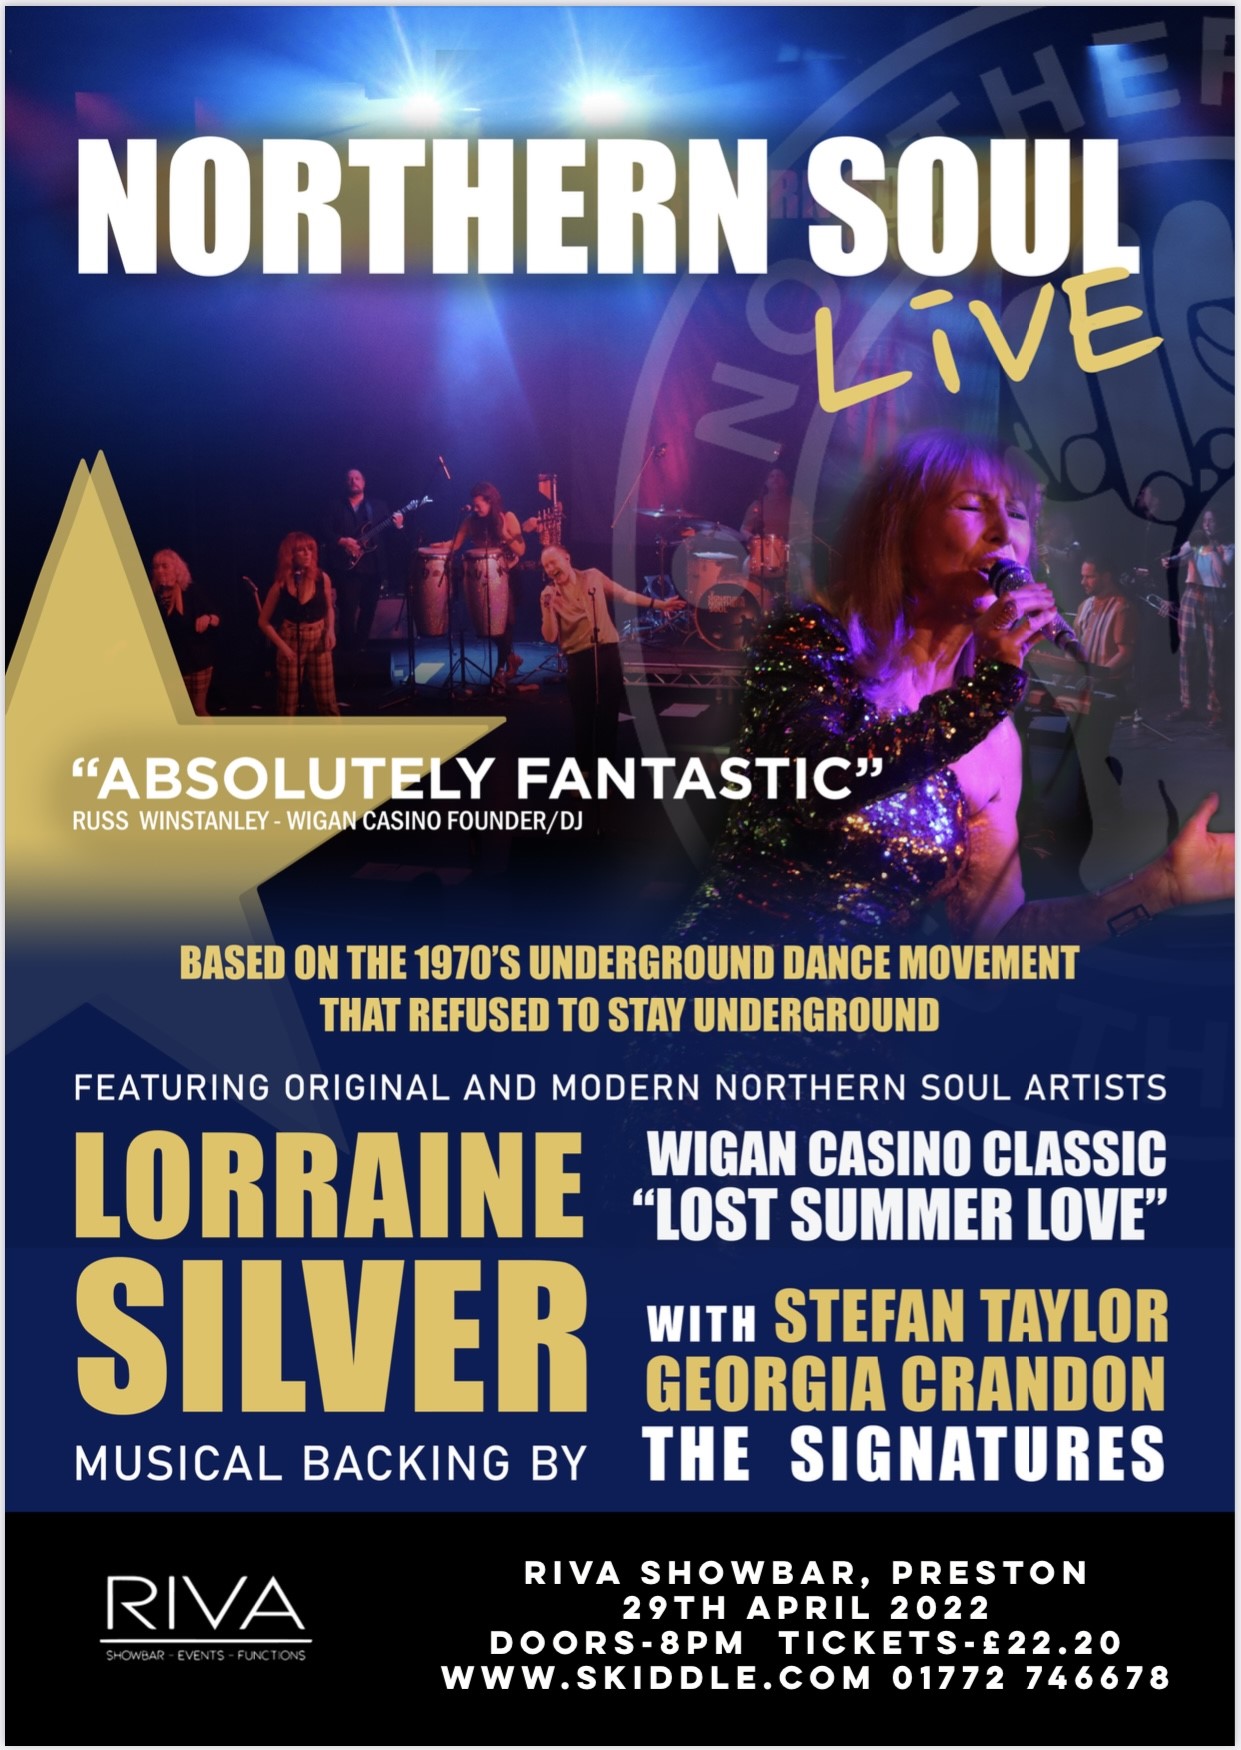 Wigan Casino Revival Night with The Signatures & Lorraine Silver Plus After Show DJ Set by Wigan Casino Legends Russ Winstanley & Alan King on Apr 29, 19:30@Riva Showbar Preston - Buy tickets and Get information on RS PROMOTIONS 